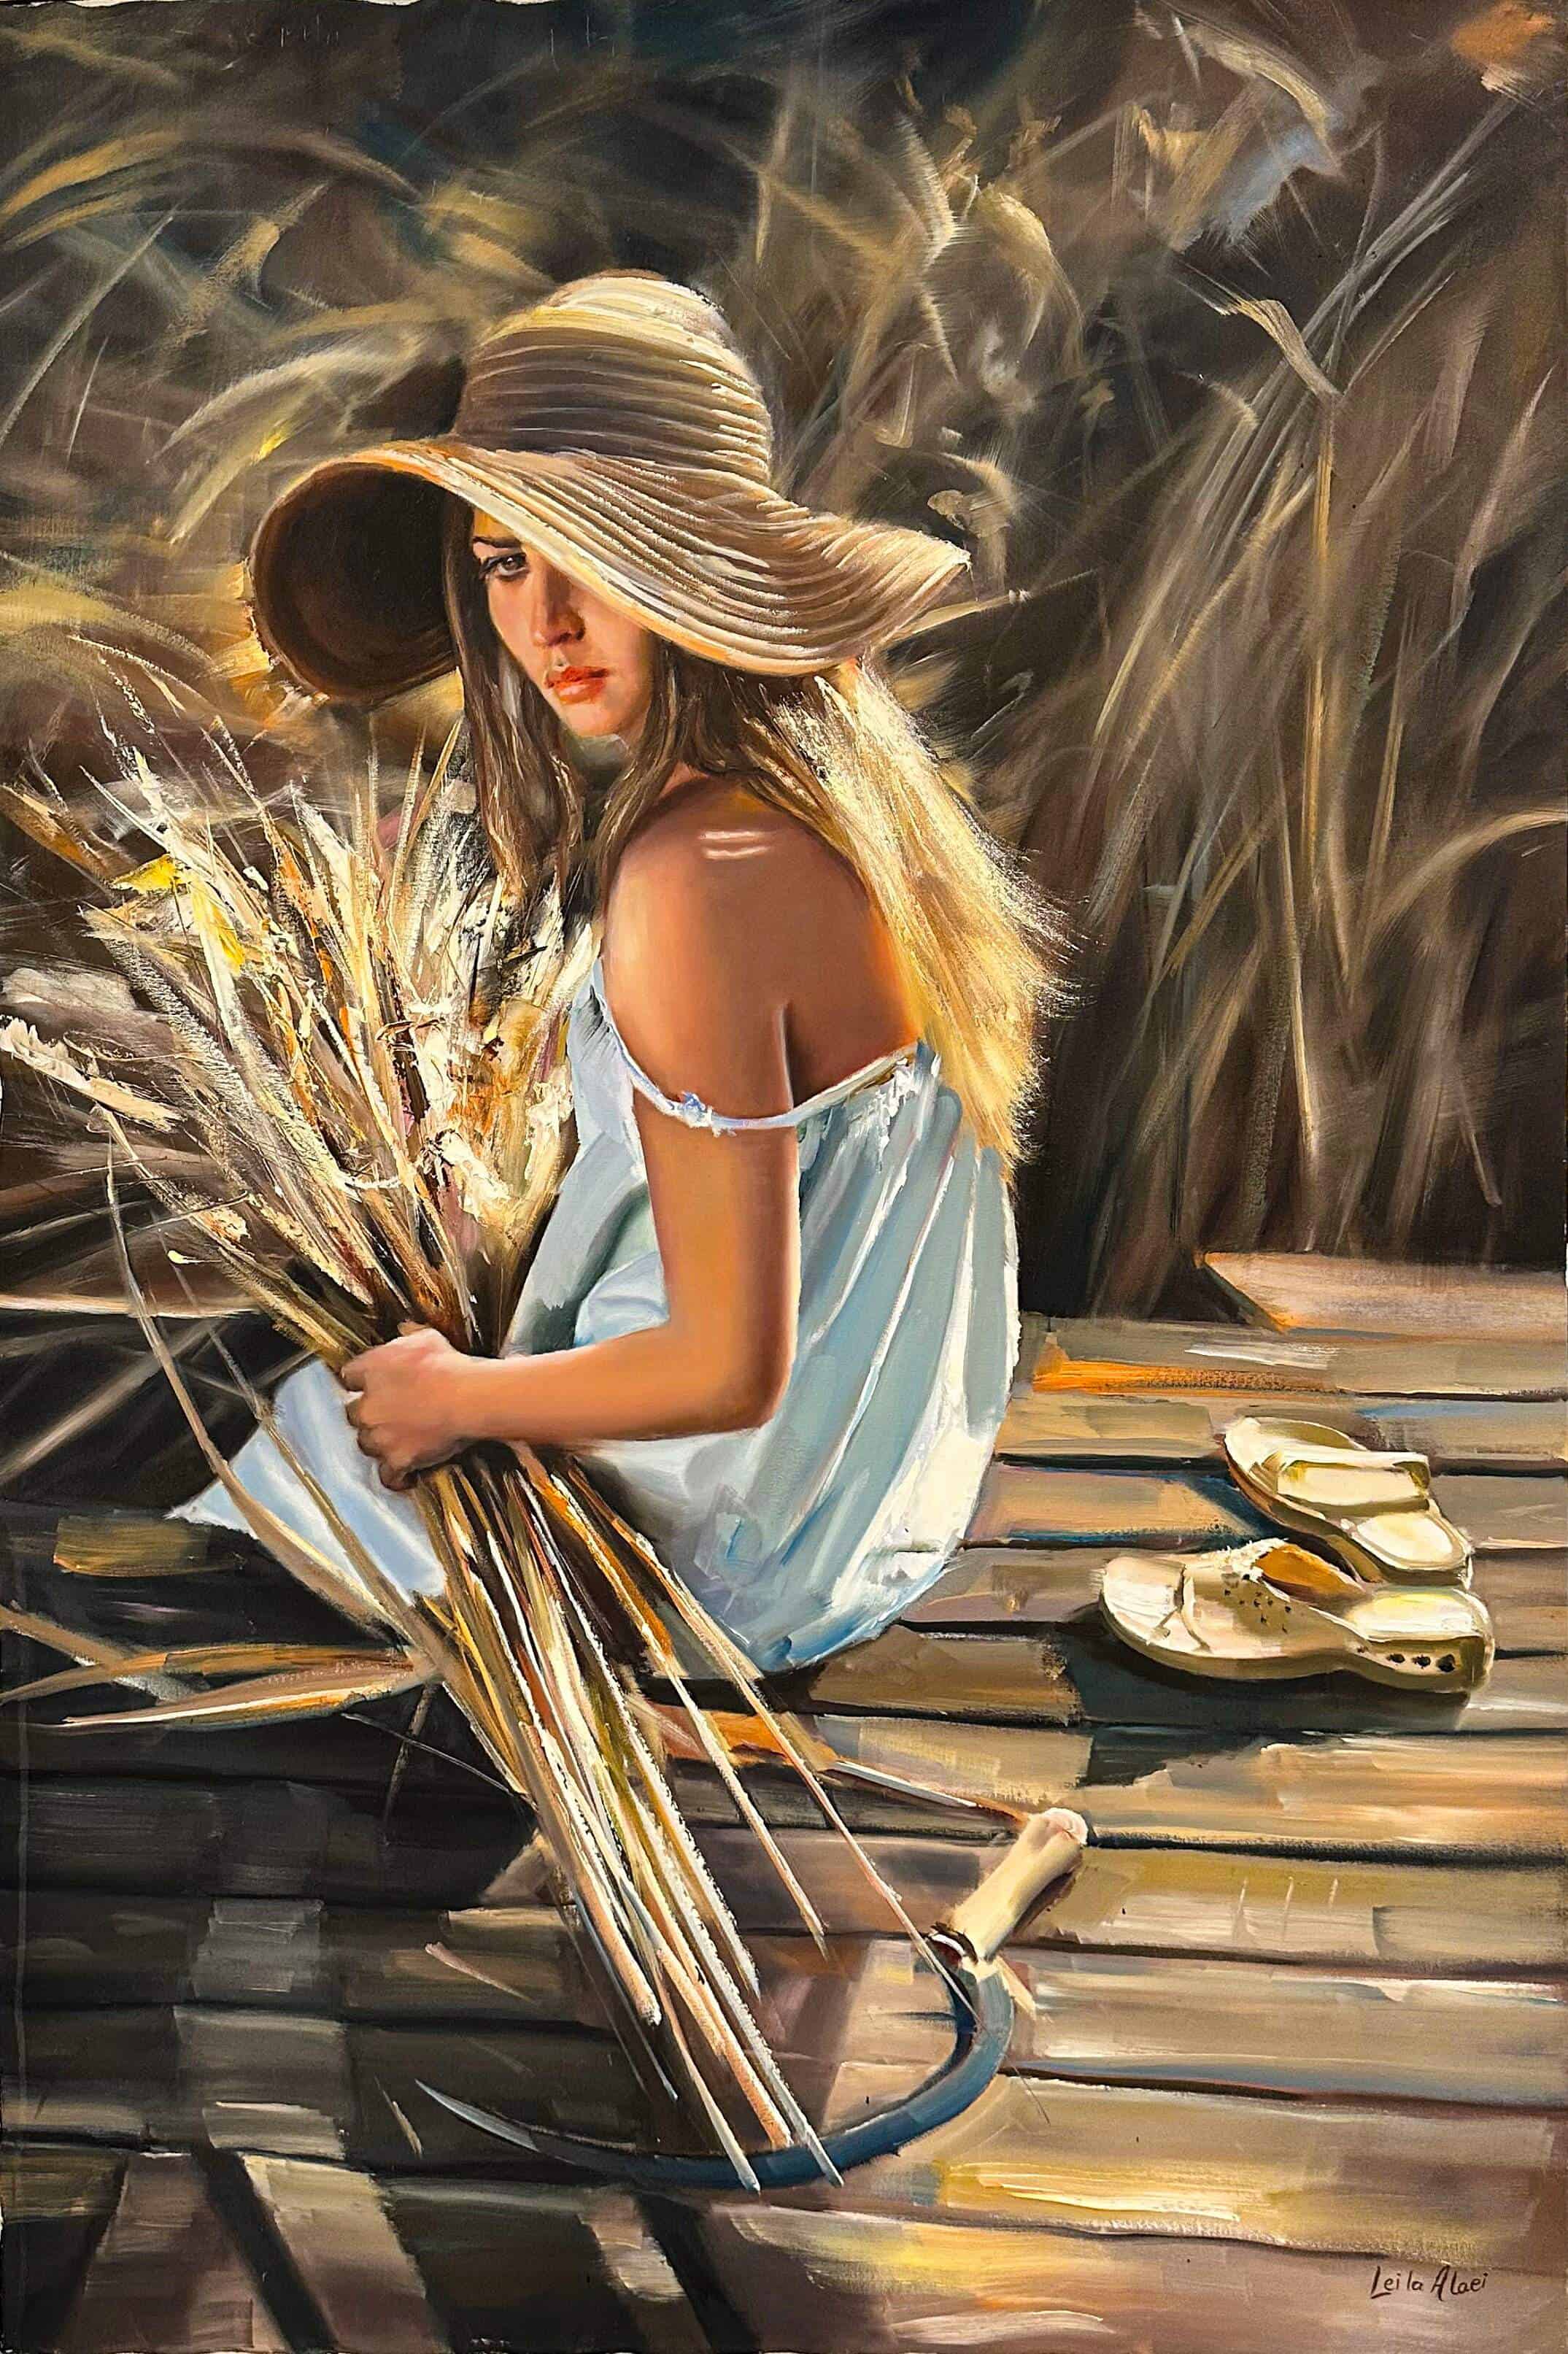 Contemporary Art. Title: Picking Wheat, Oil on Canvas, 47 x 32 in by Canadian Artist Leila Alaei.